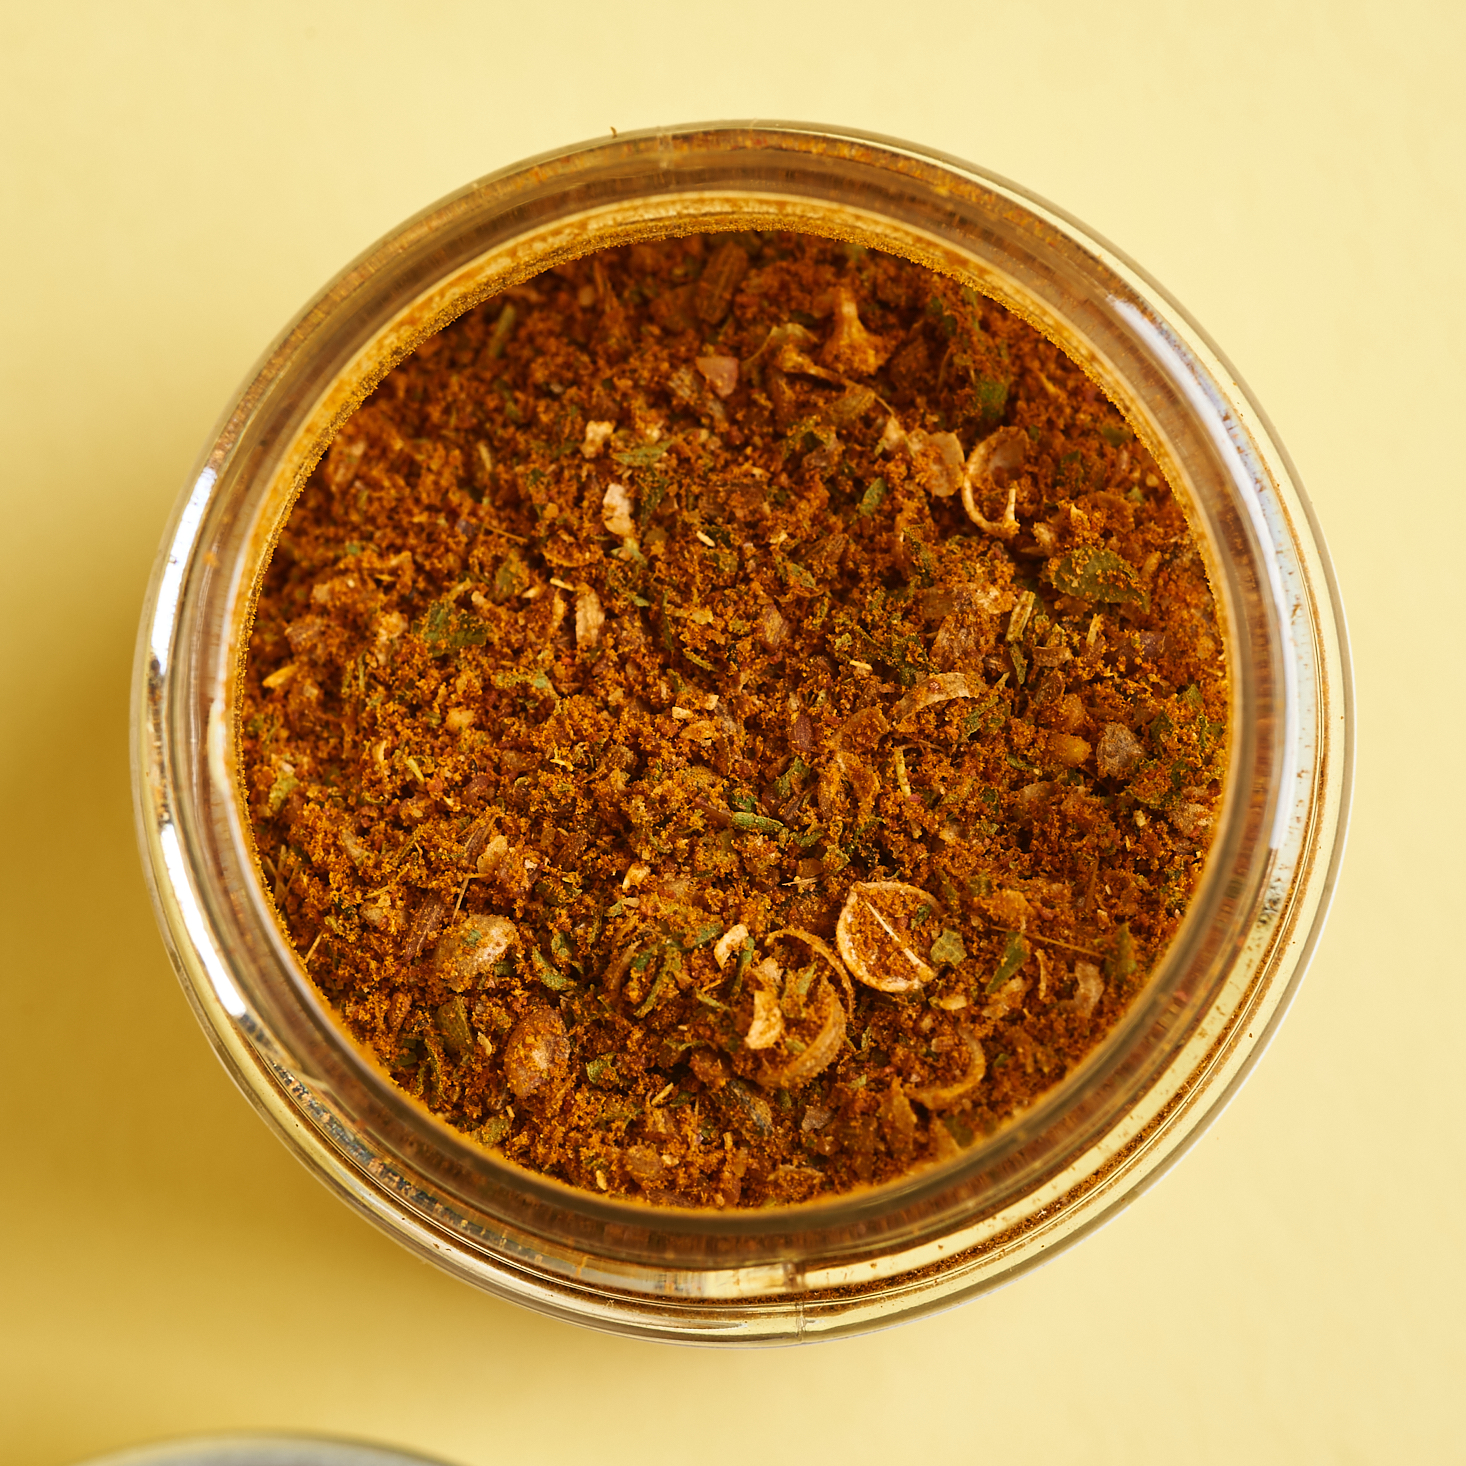 A detail shot of the open Schwarma Spice far showing the contents of the dry spice mix